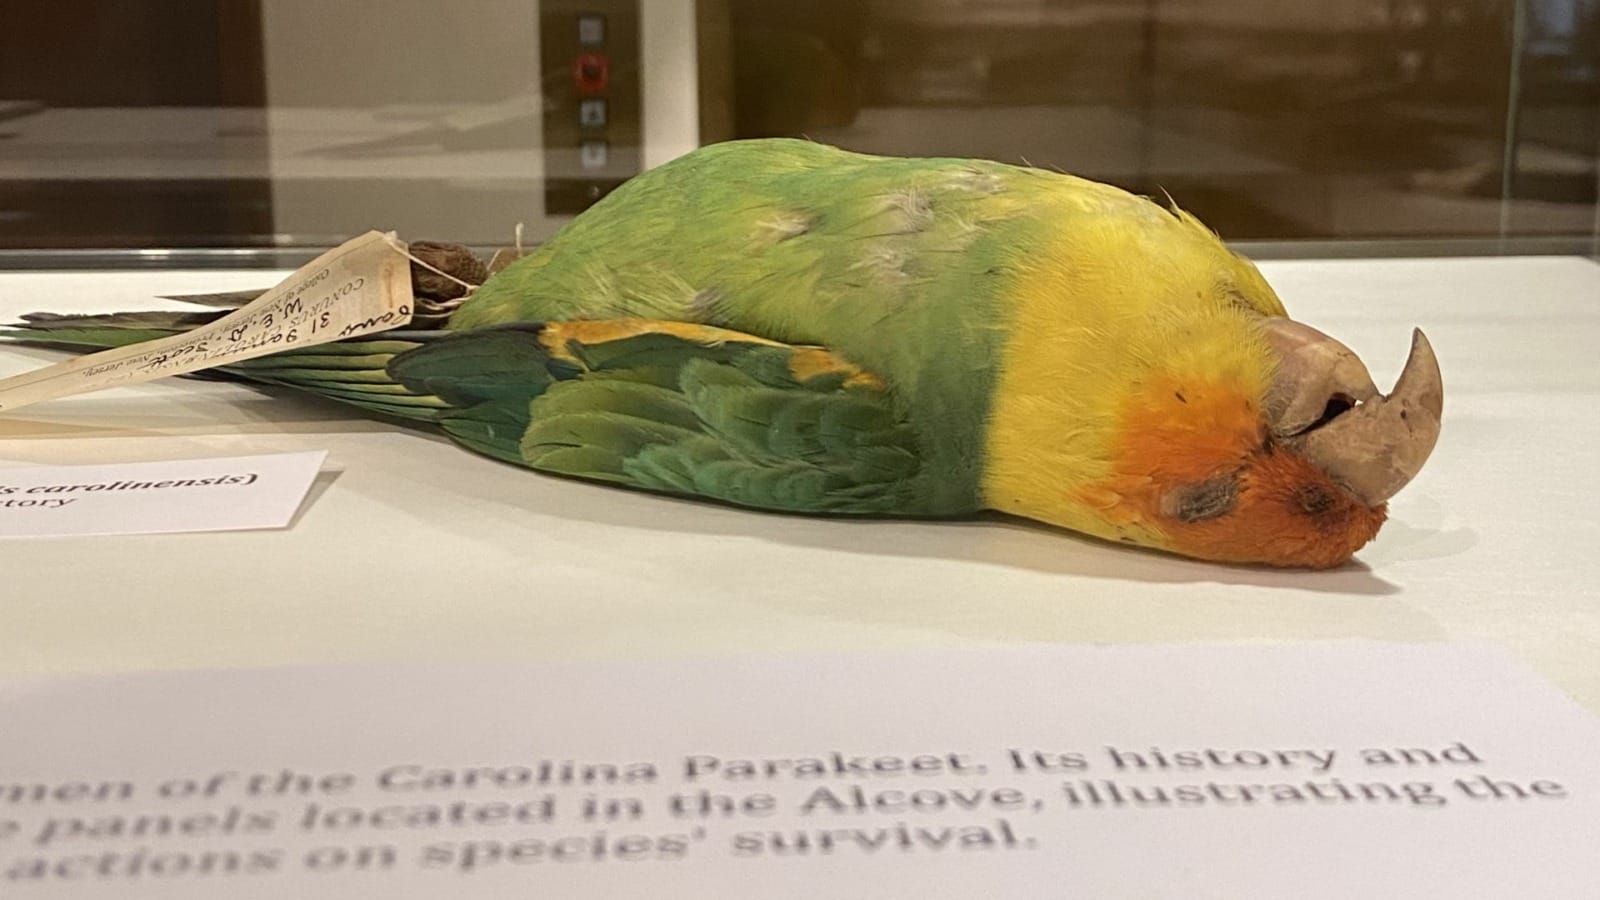 Above is a taxidermied specimen of the extinct Carolina Parrot. It is on loan from the Chicago Field Museum collections.